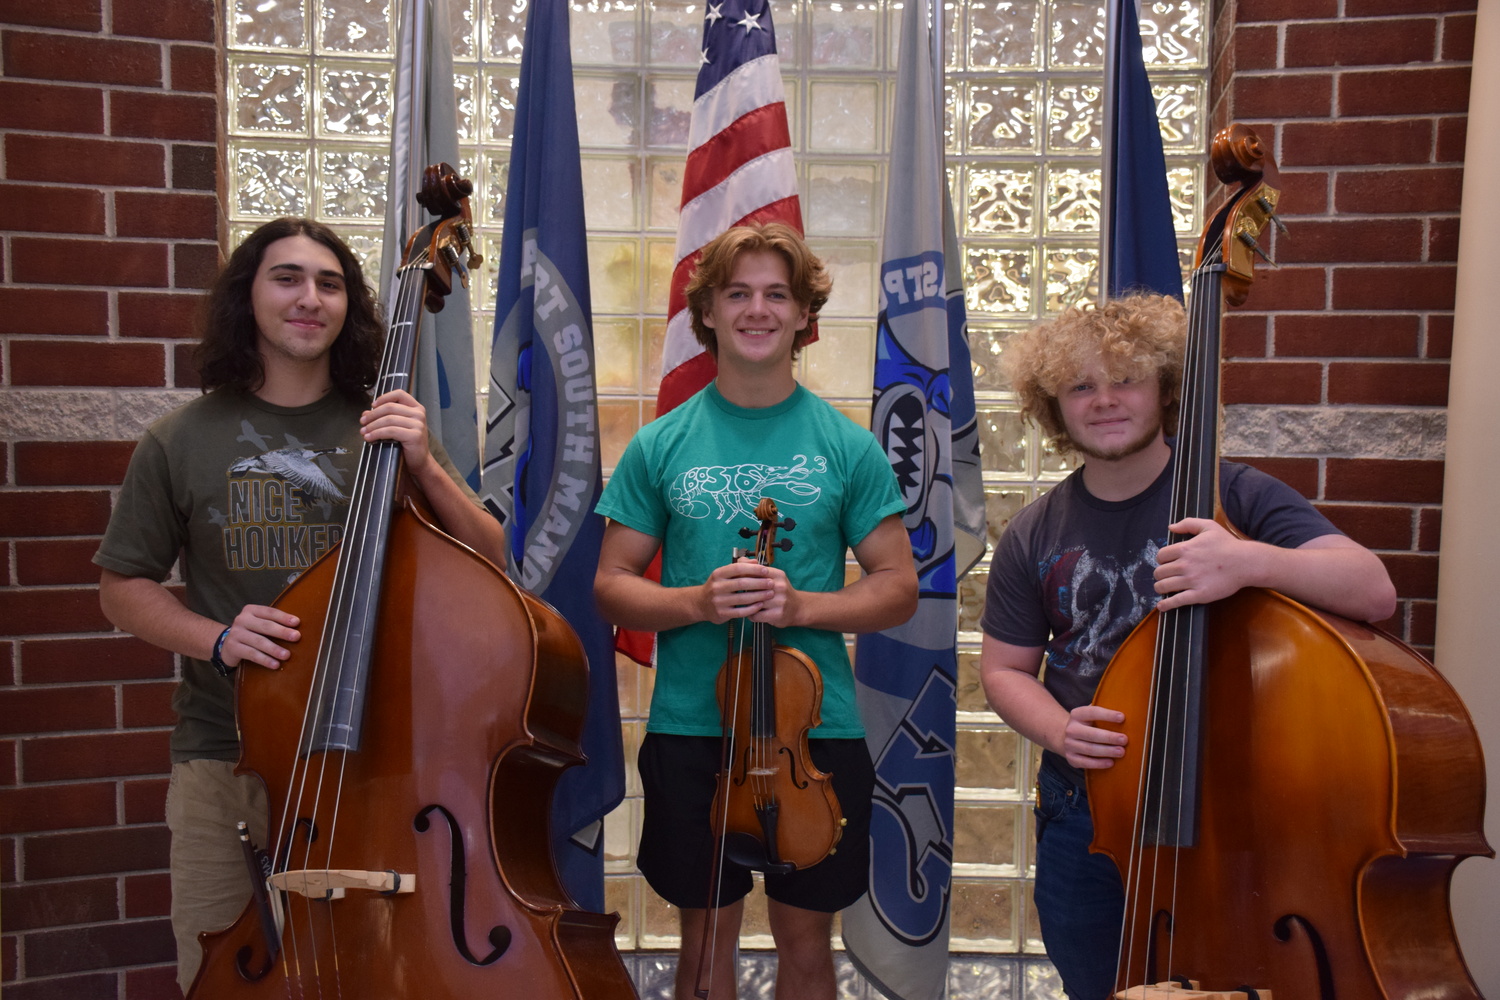 Eastport-South Manor Jr.-Sr. High School musicians, from left, John Schroeder, Grant Burns and Alexander Kapopulos were selected to perform at the NYSSMA All-State Winter Conference. COURTESY EASTPORT0SOUTH MANOR SCHOOL DISTRICT